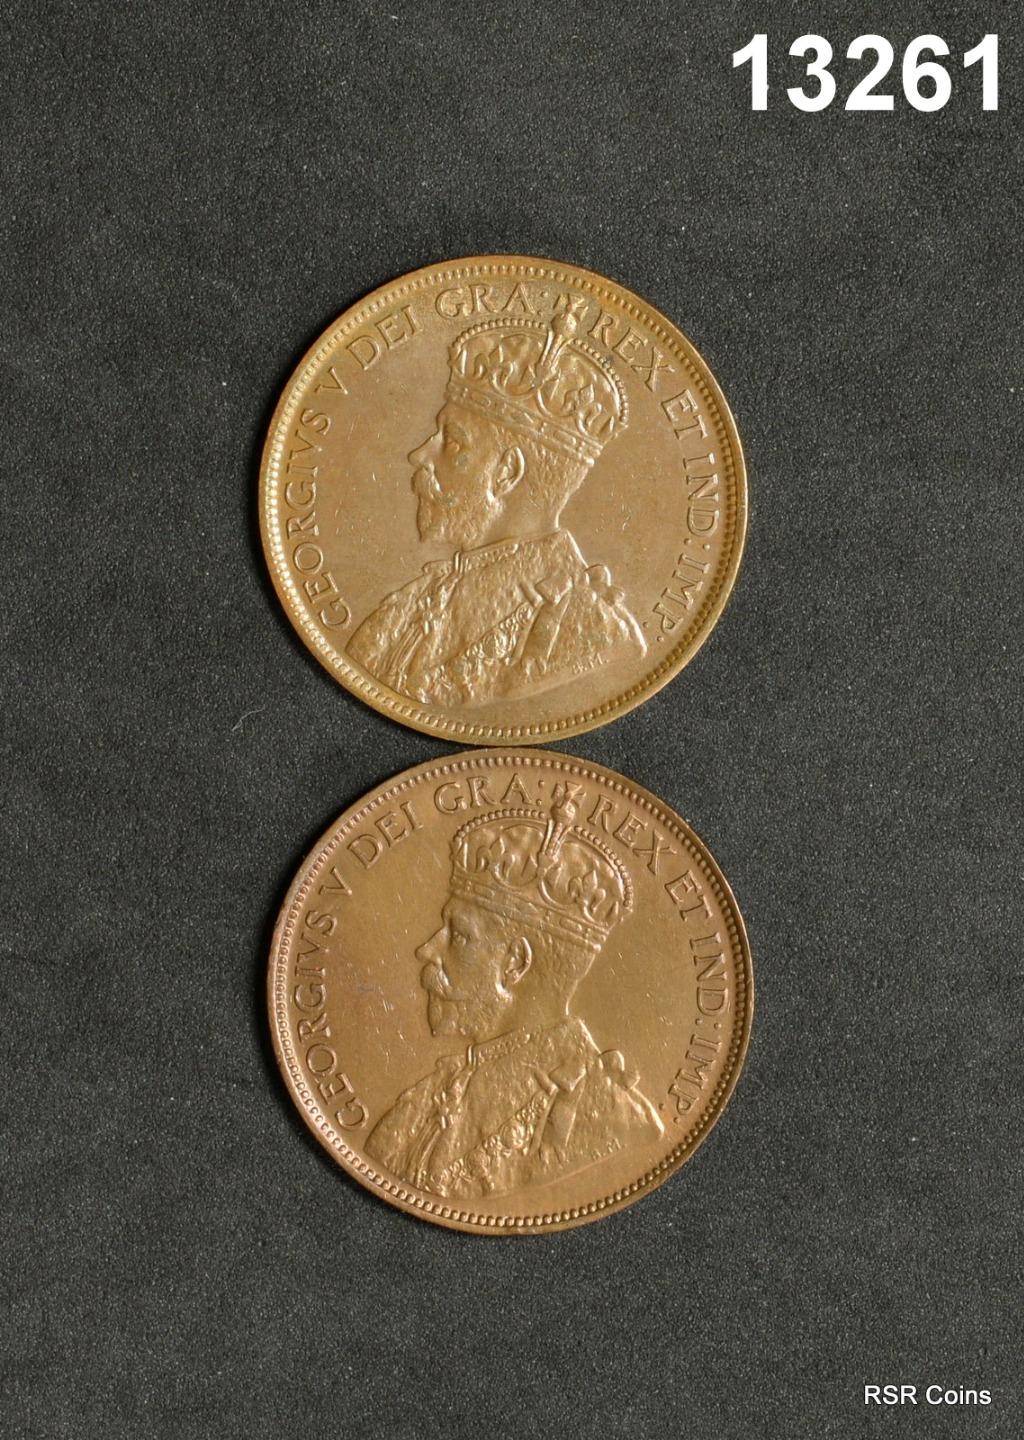 1916 & 1920 CANADA LARGE CENT LOT OF 2 COINS BU! #13261